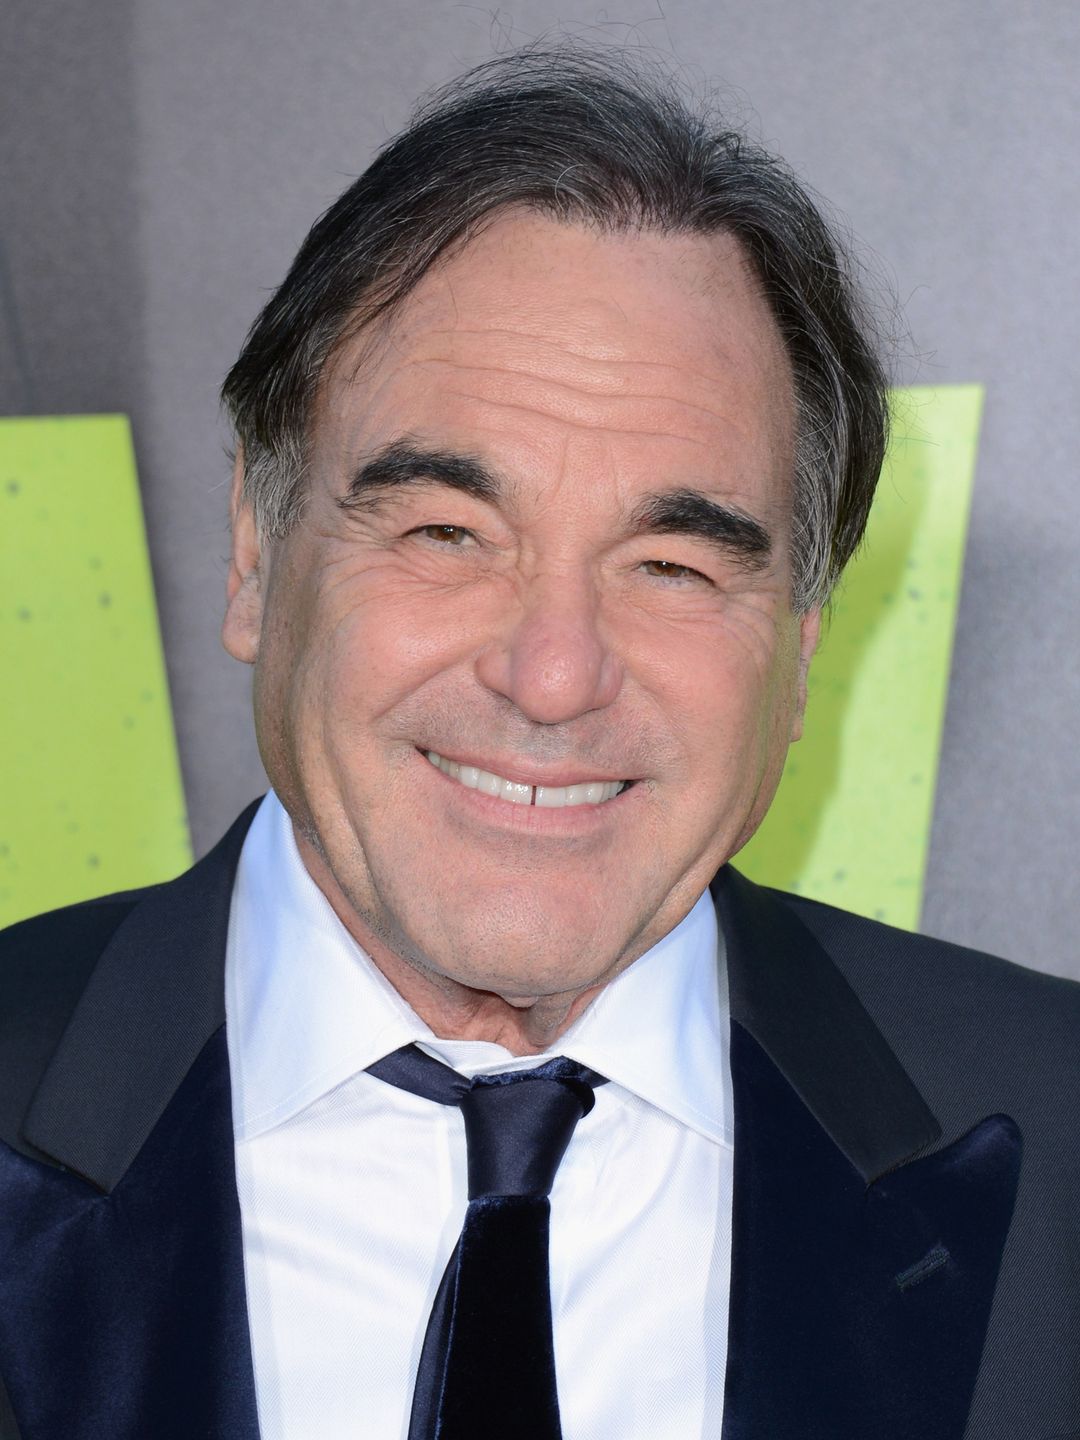 Oliver Stone young age